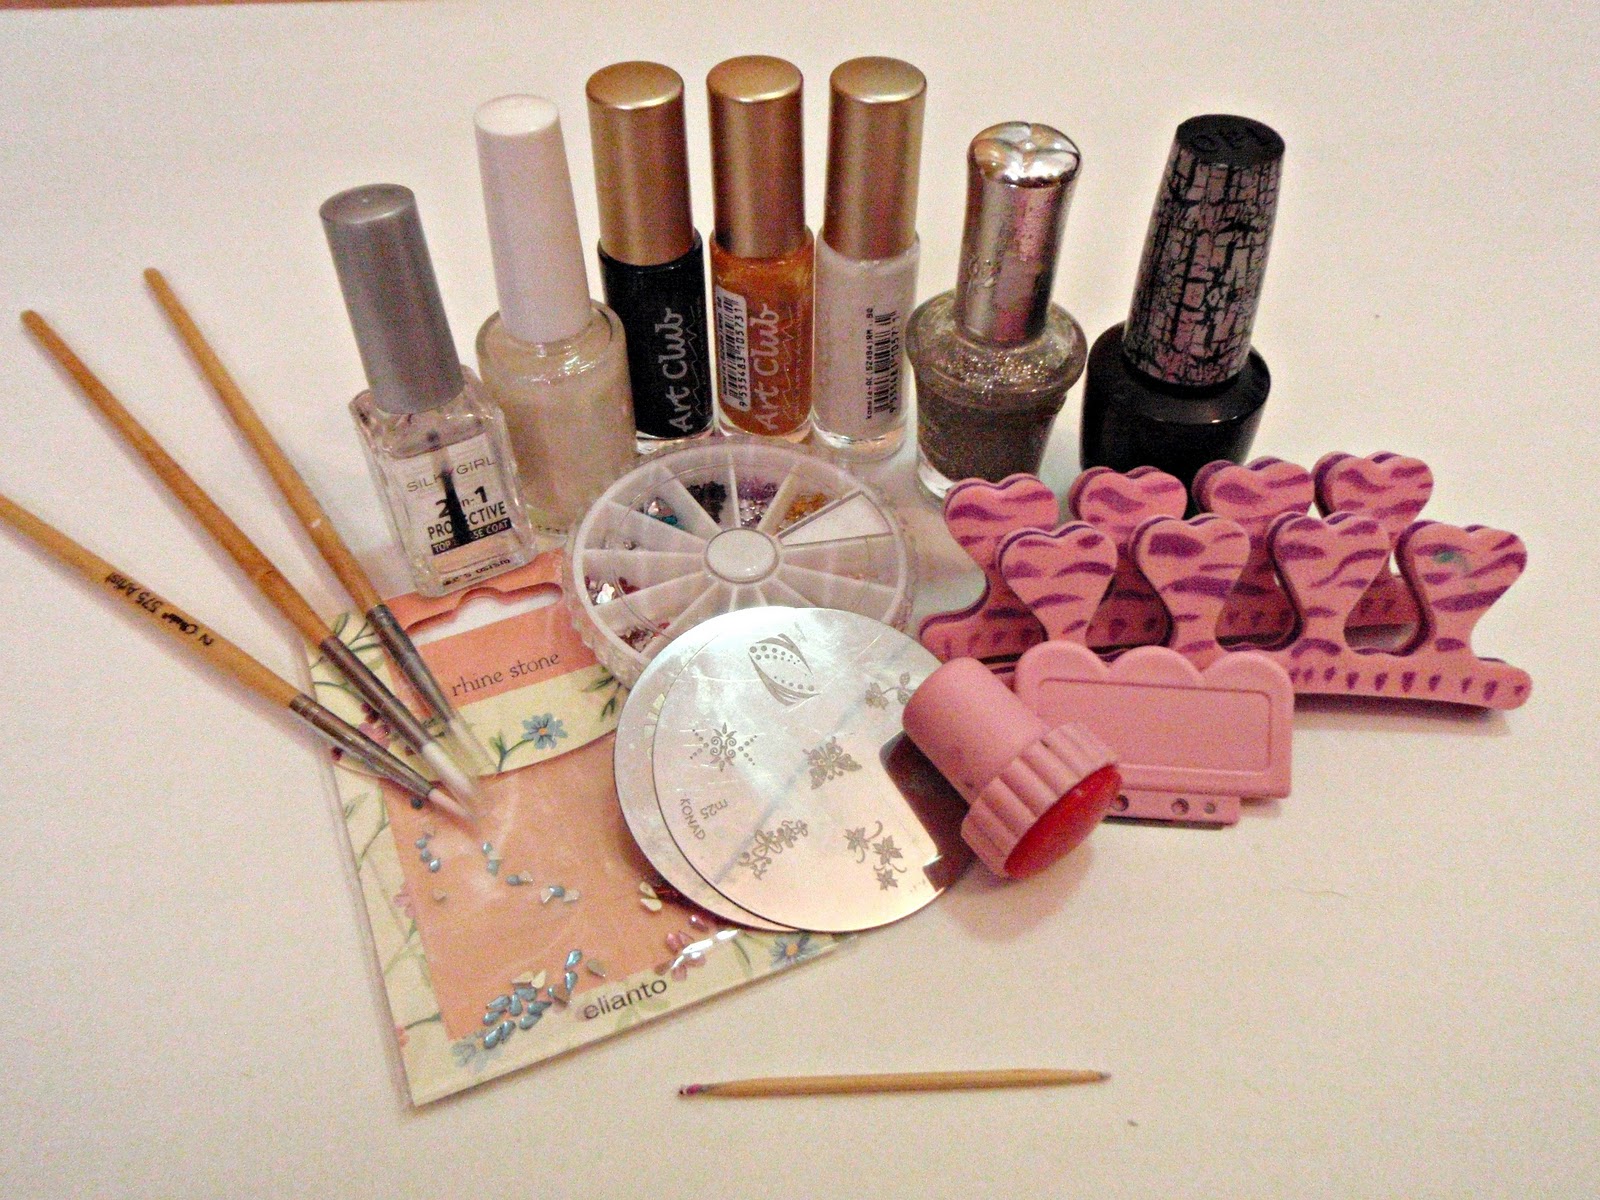 2. Lore Nail Art Products - wide 1